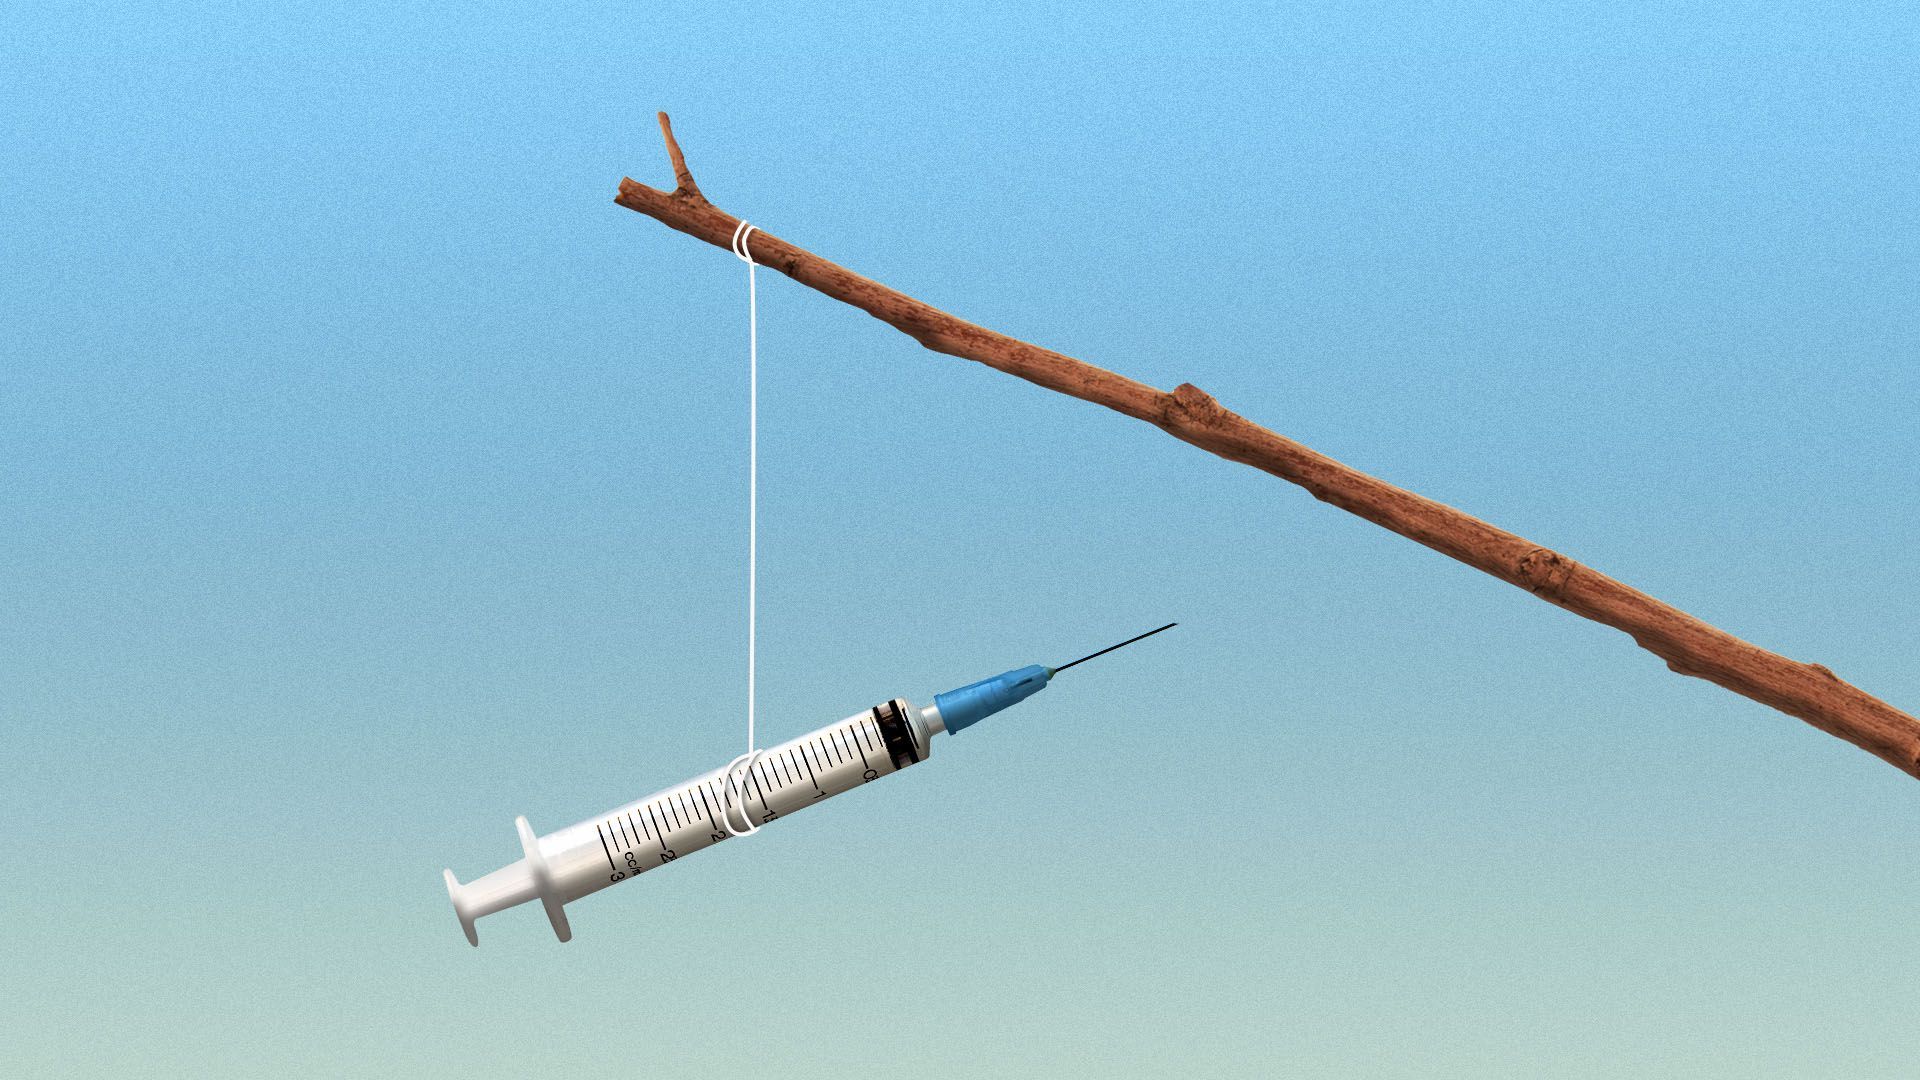 Illustration of a syringe tied to a string on a stick